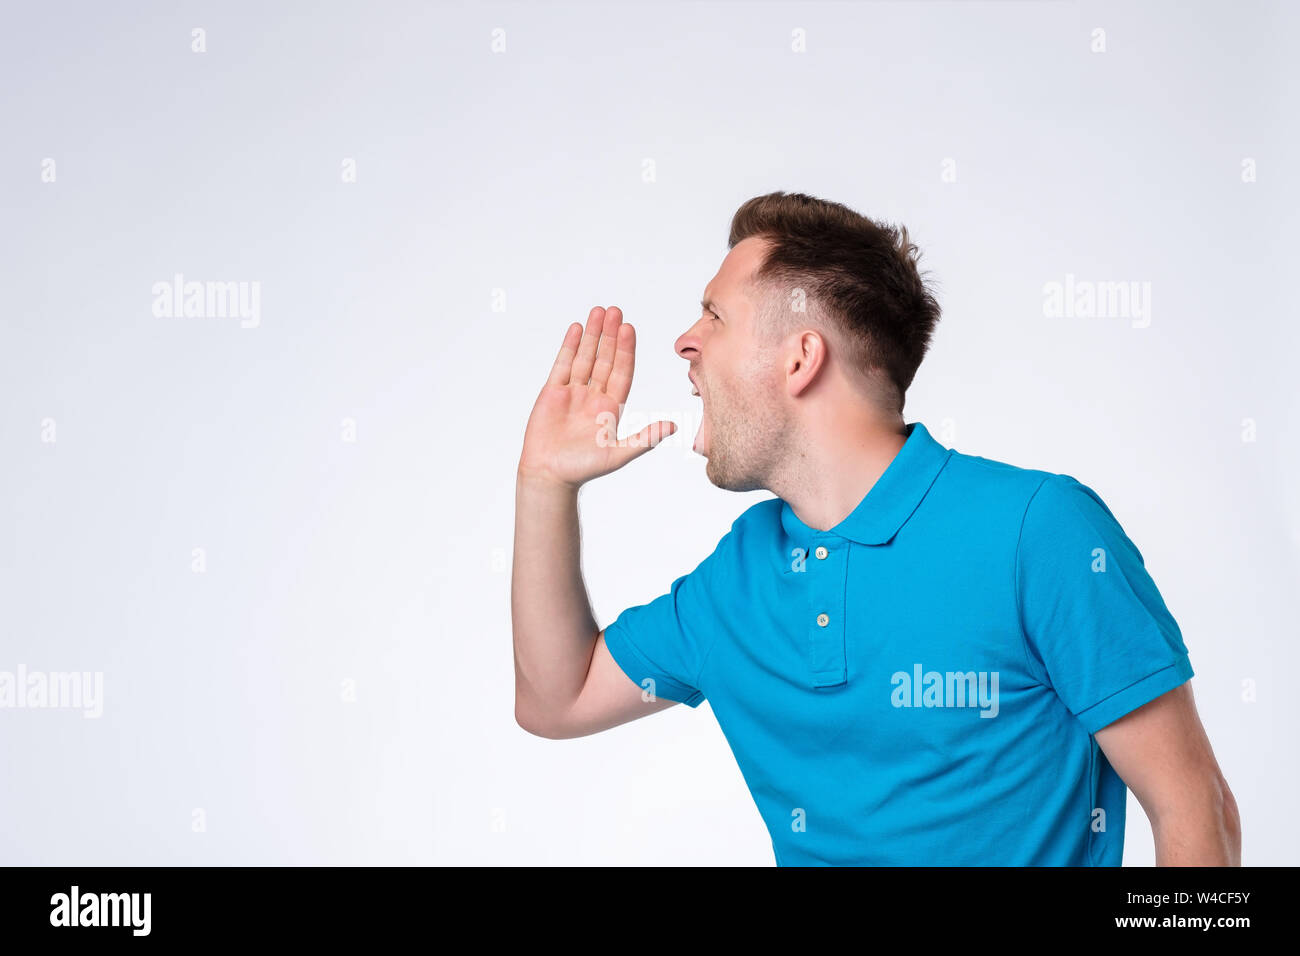 Handsome young man calling someone. Side view. Stock Photo